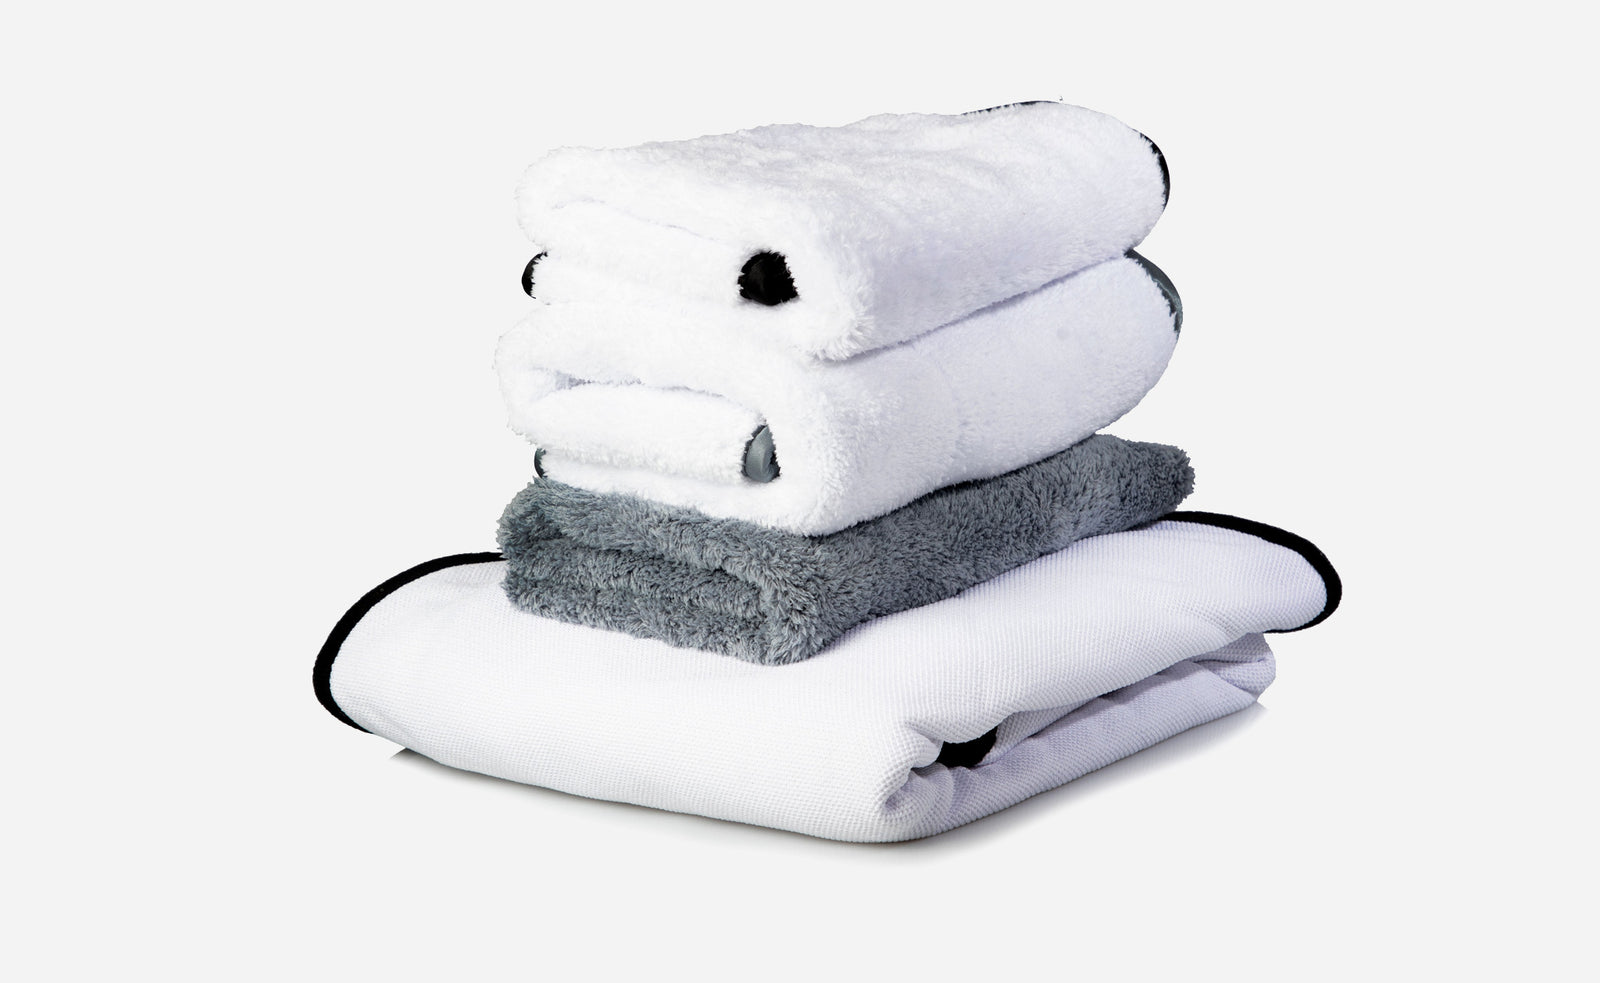 Whip-It Approved White Terry Cloth Cleaning Towels -12 Pack Bundle